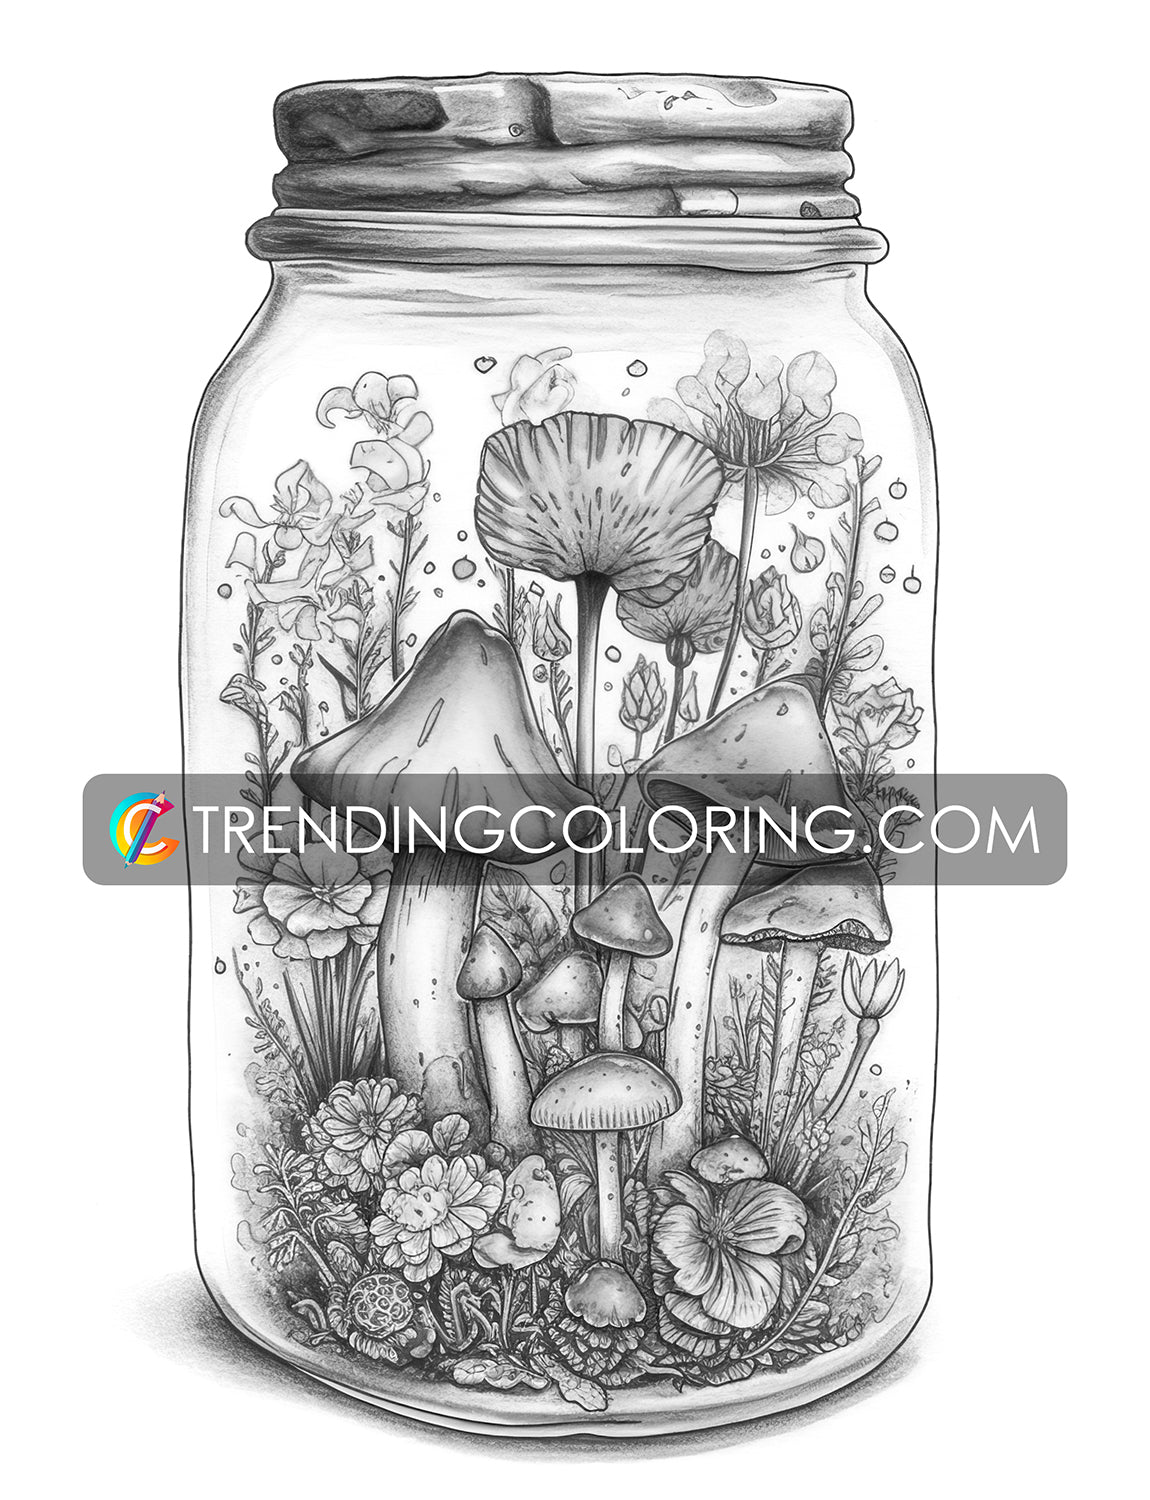 25 Mushroom Forest In Jar Grayscale Coloring Pages - Instant Download - Printable PDF Dark/Light